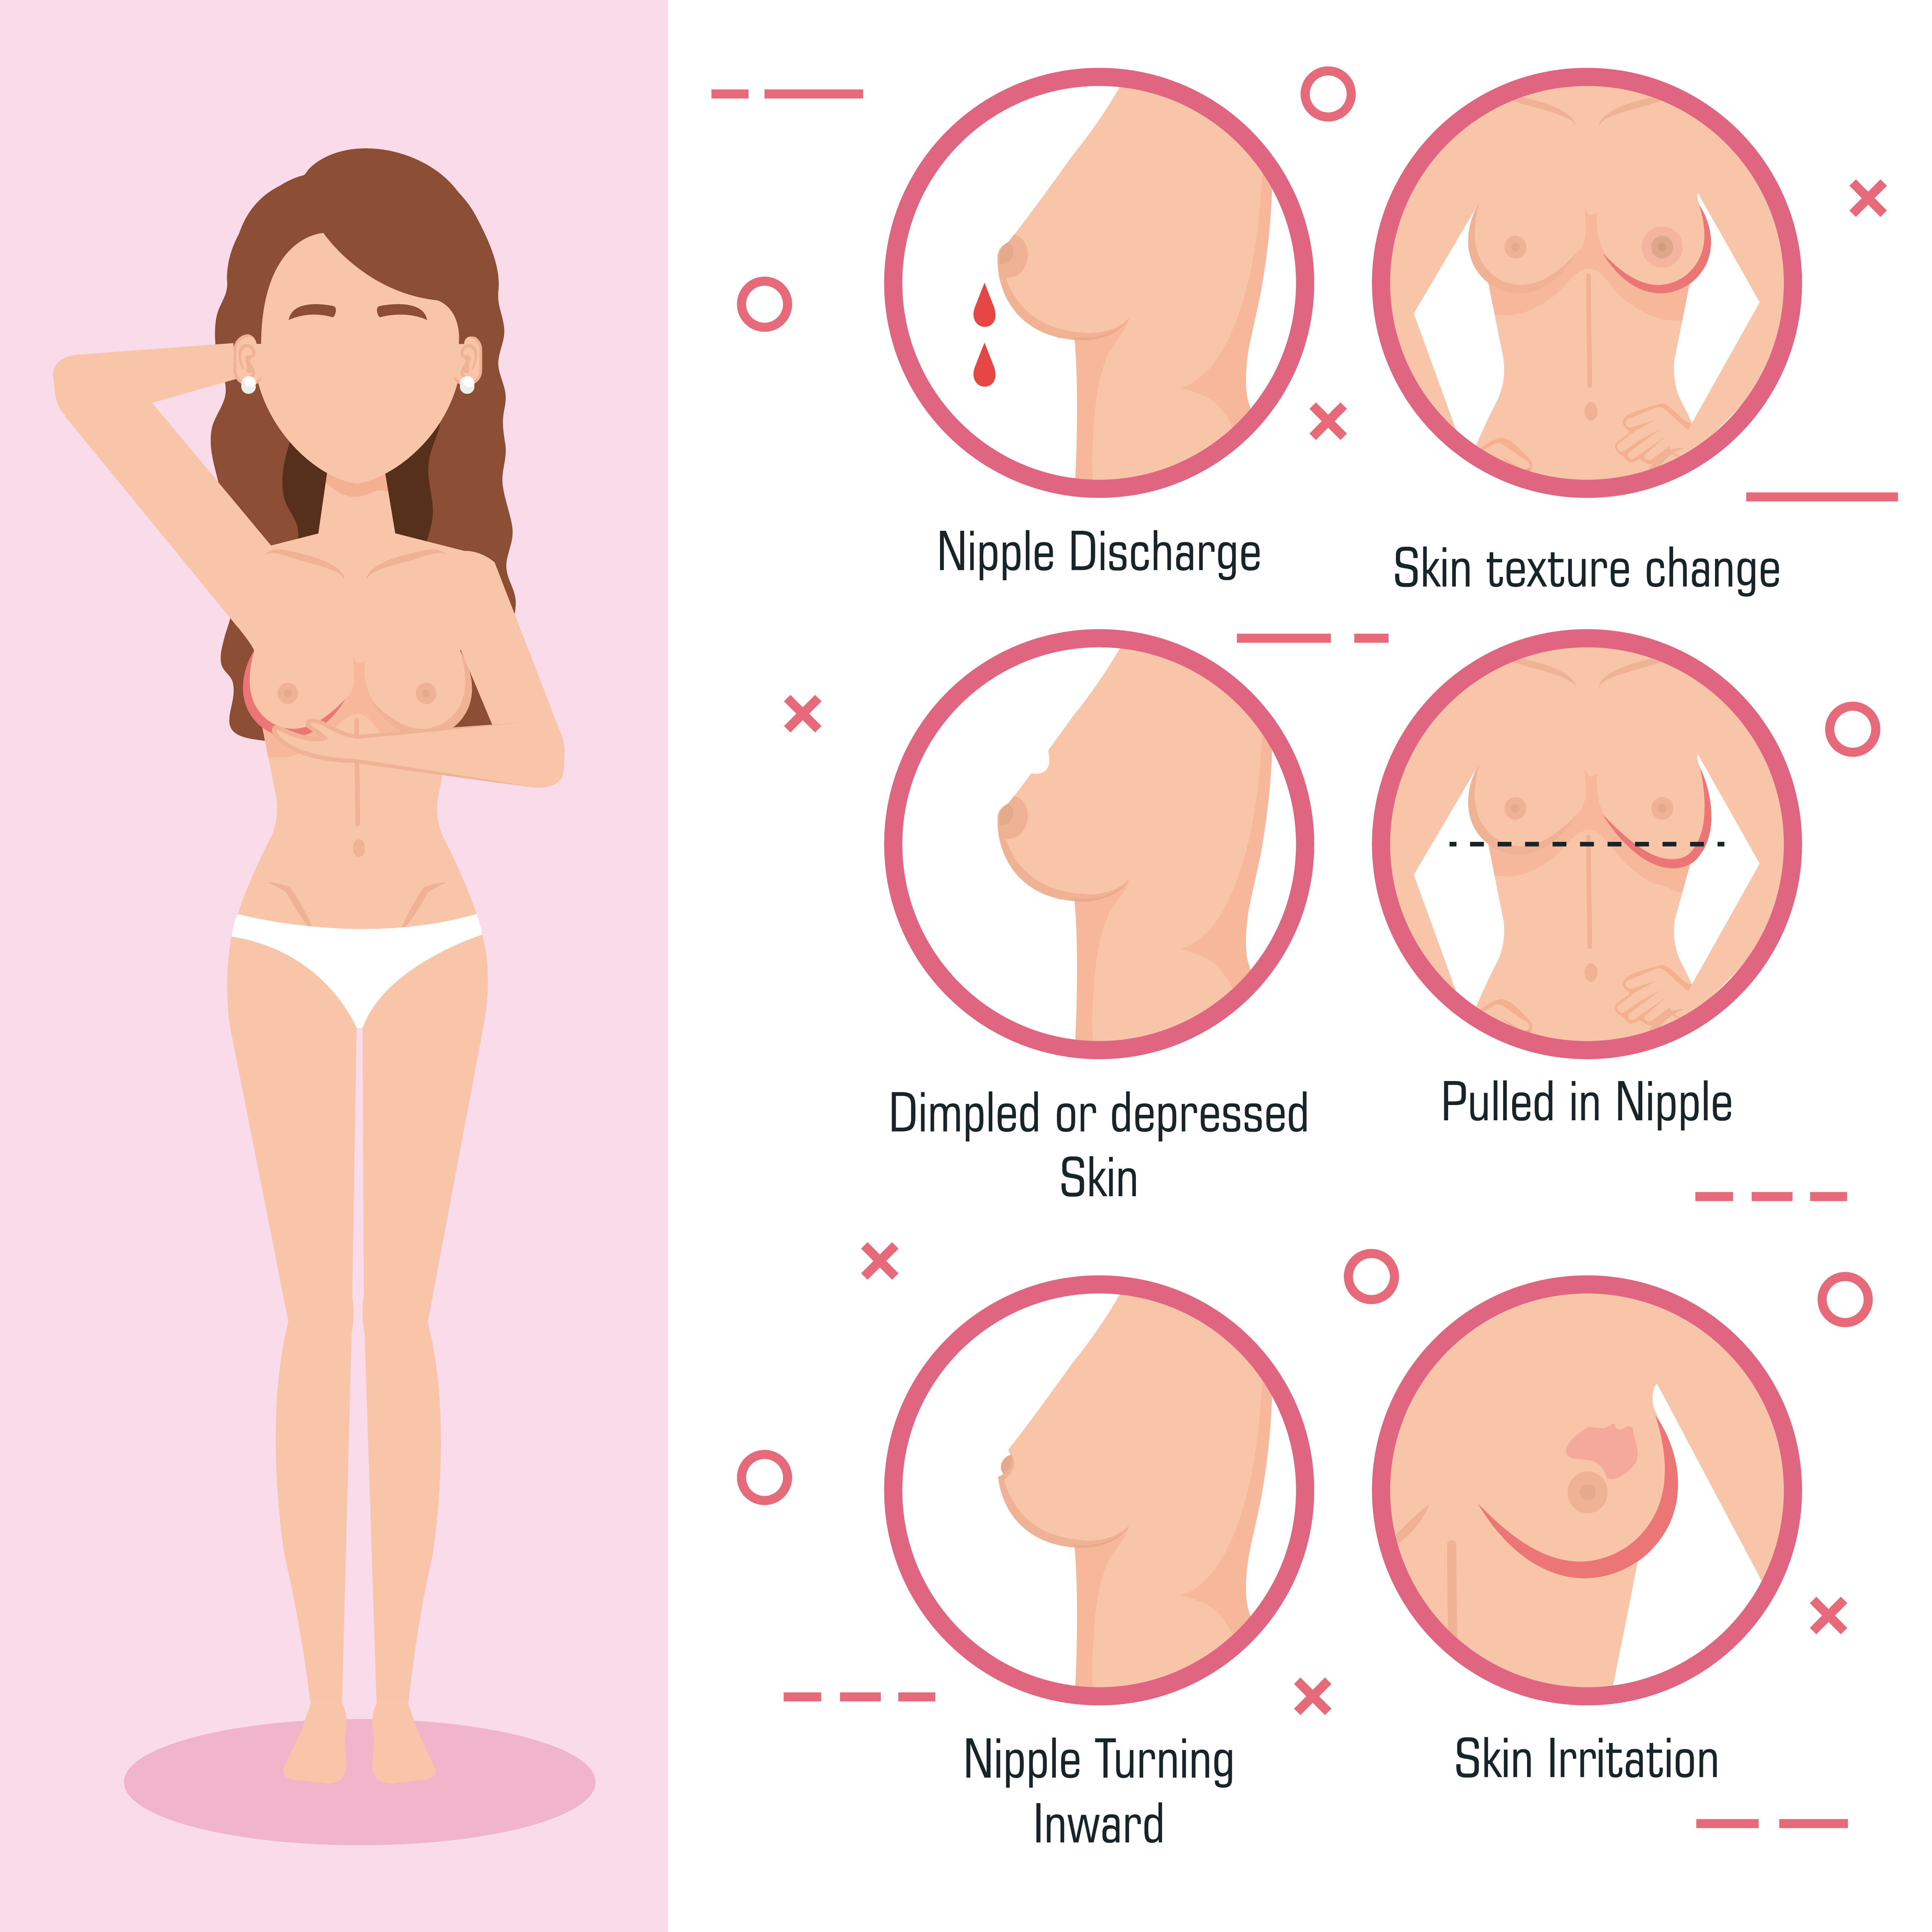 What are the signs and symptoms of breast cancer?